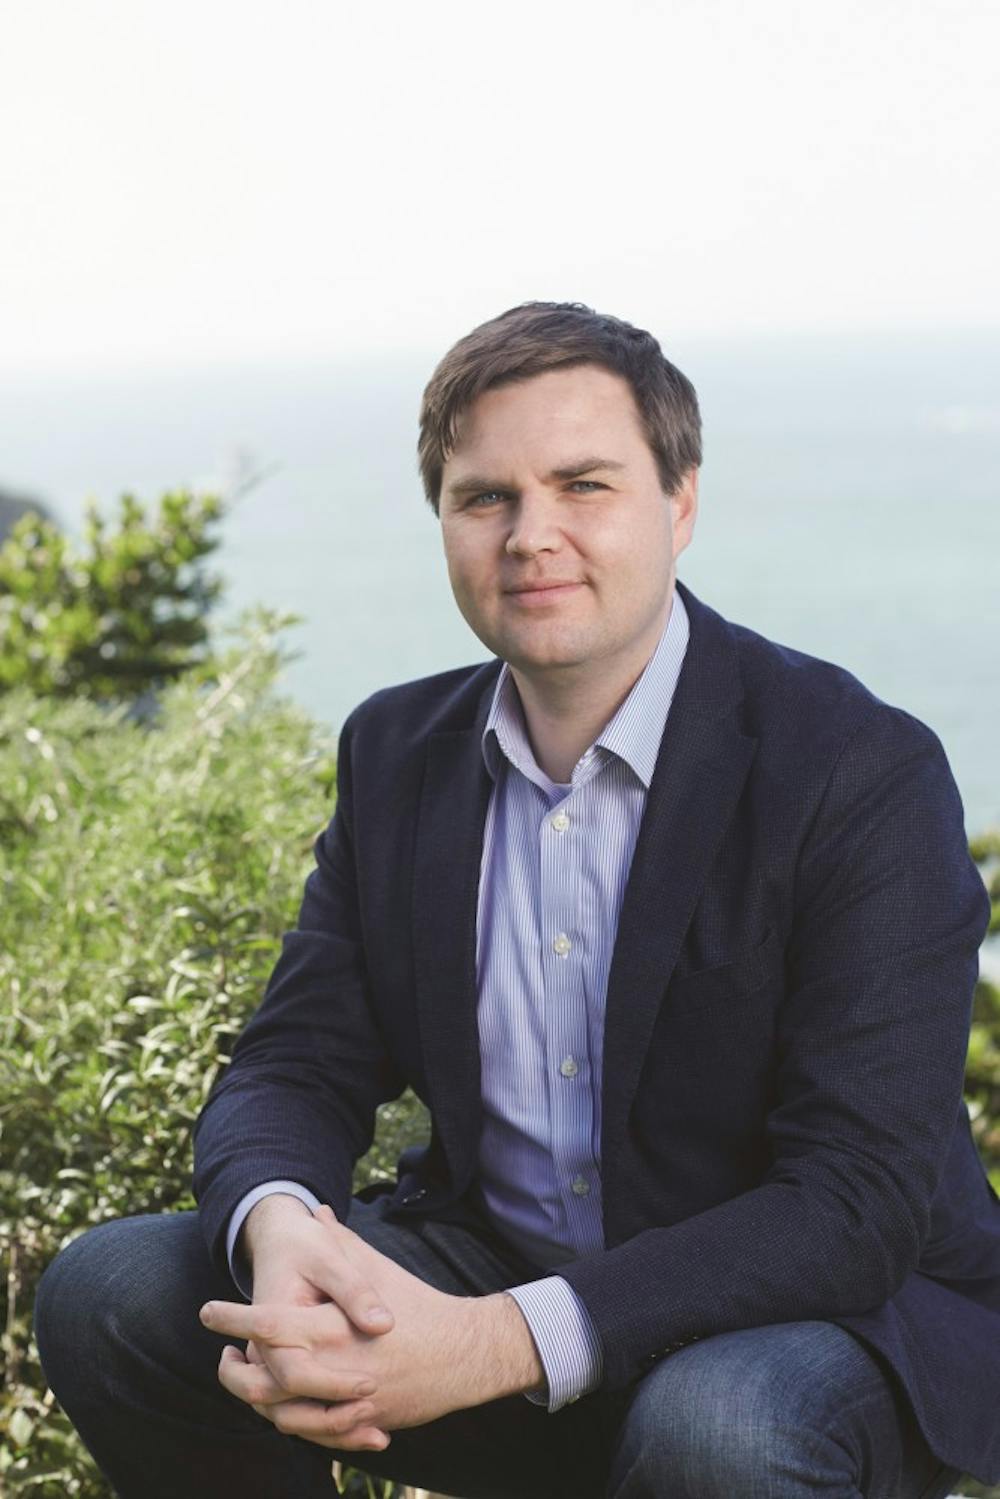 Next year's Go Big Read book will be "Hillbilly Elegy" by J.D. Vance.